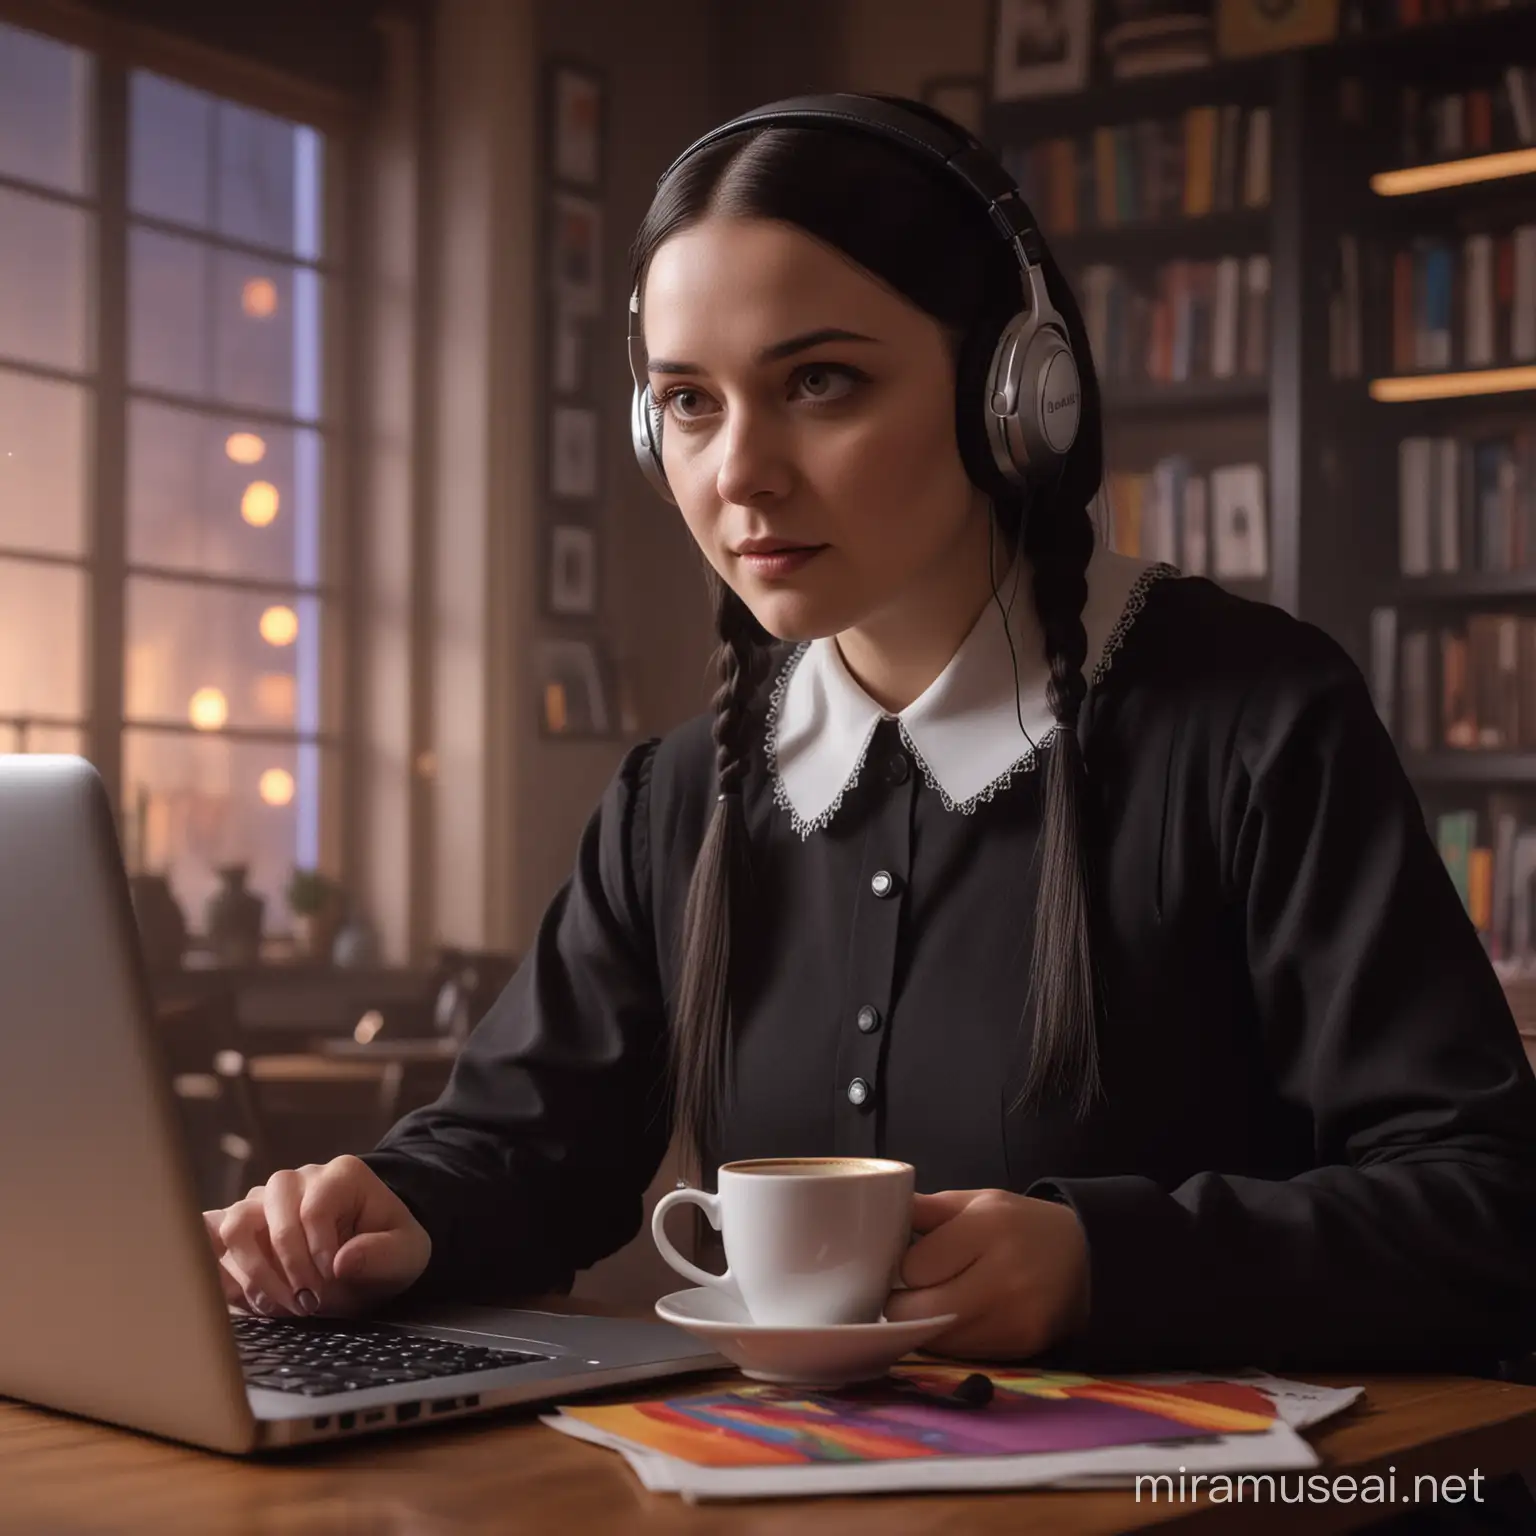 wednesday addams look with headphones. She is comfortably seated, wearing headphones and sipping from a steaming cup of coffee. A laptop is open in front of her, with several colorful tabs visible on the screen. The overall atmosphere is cozy and productive, with warm lighting and soft shadows creating a serene ambiance.